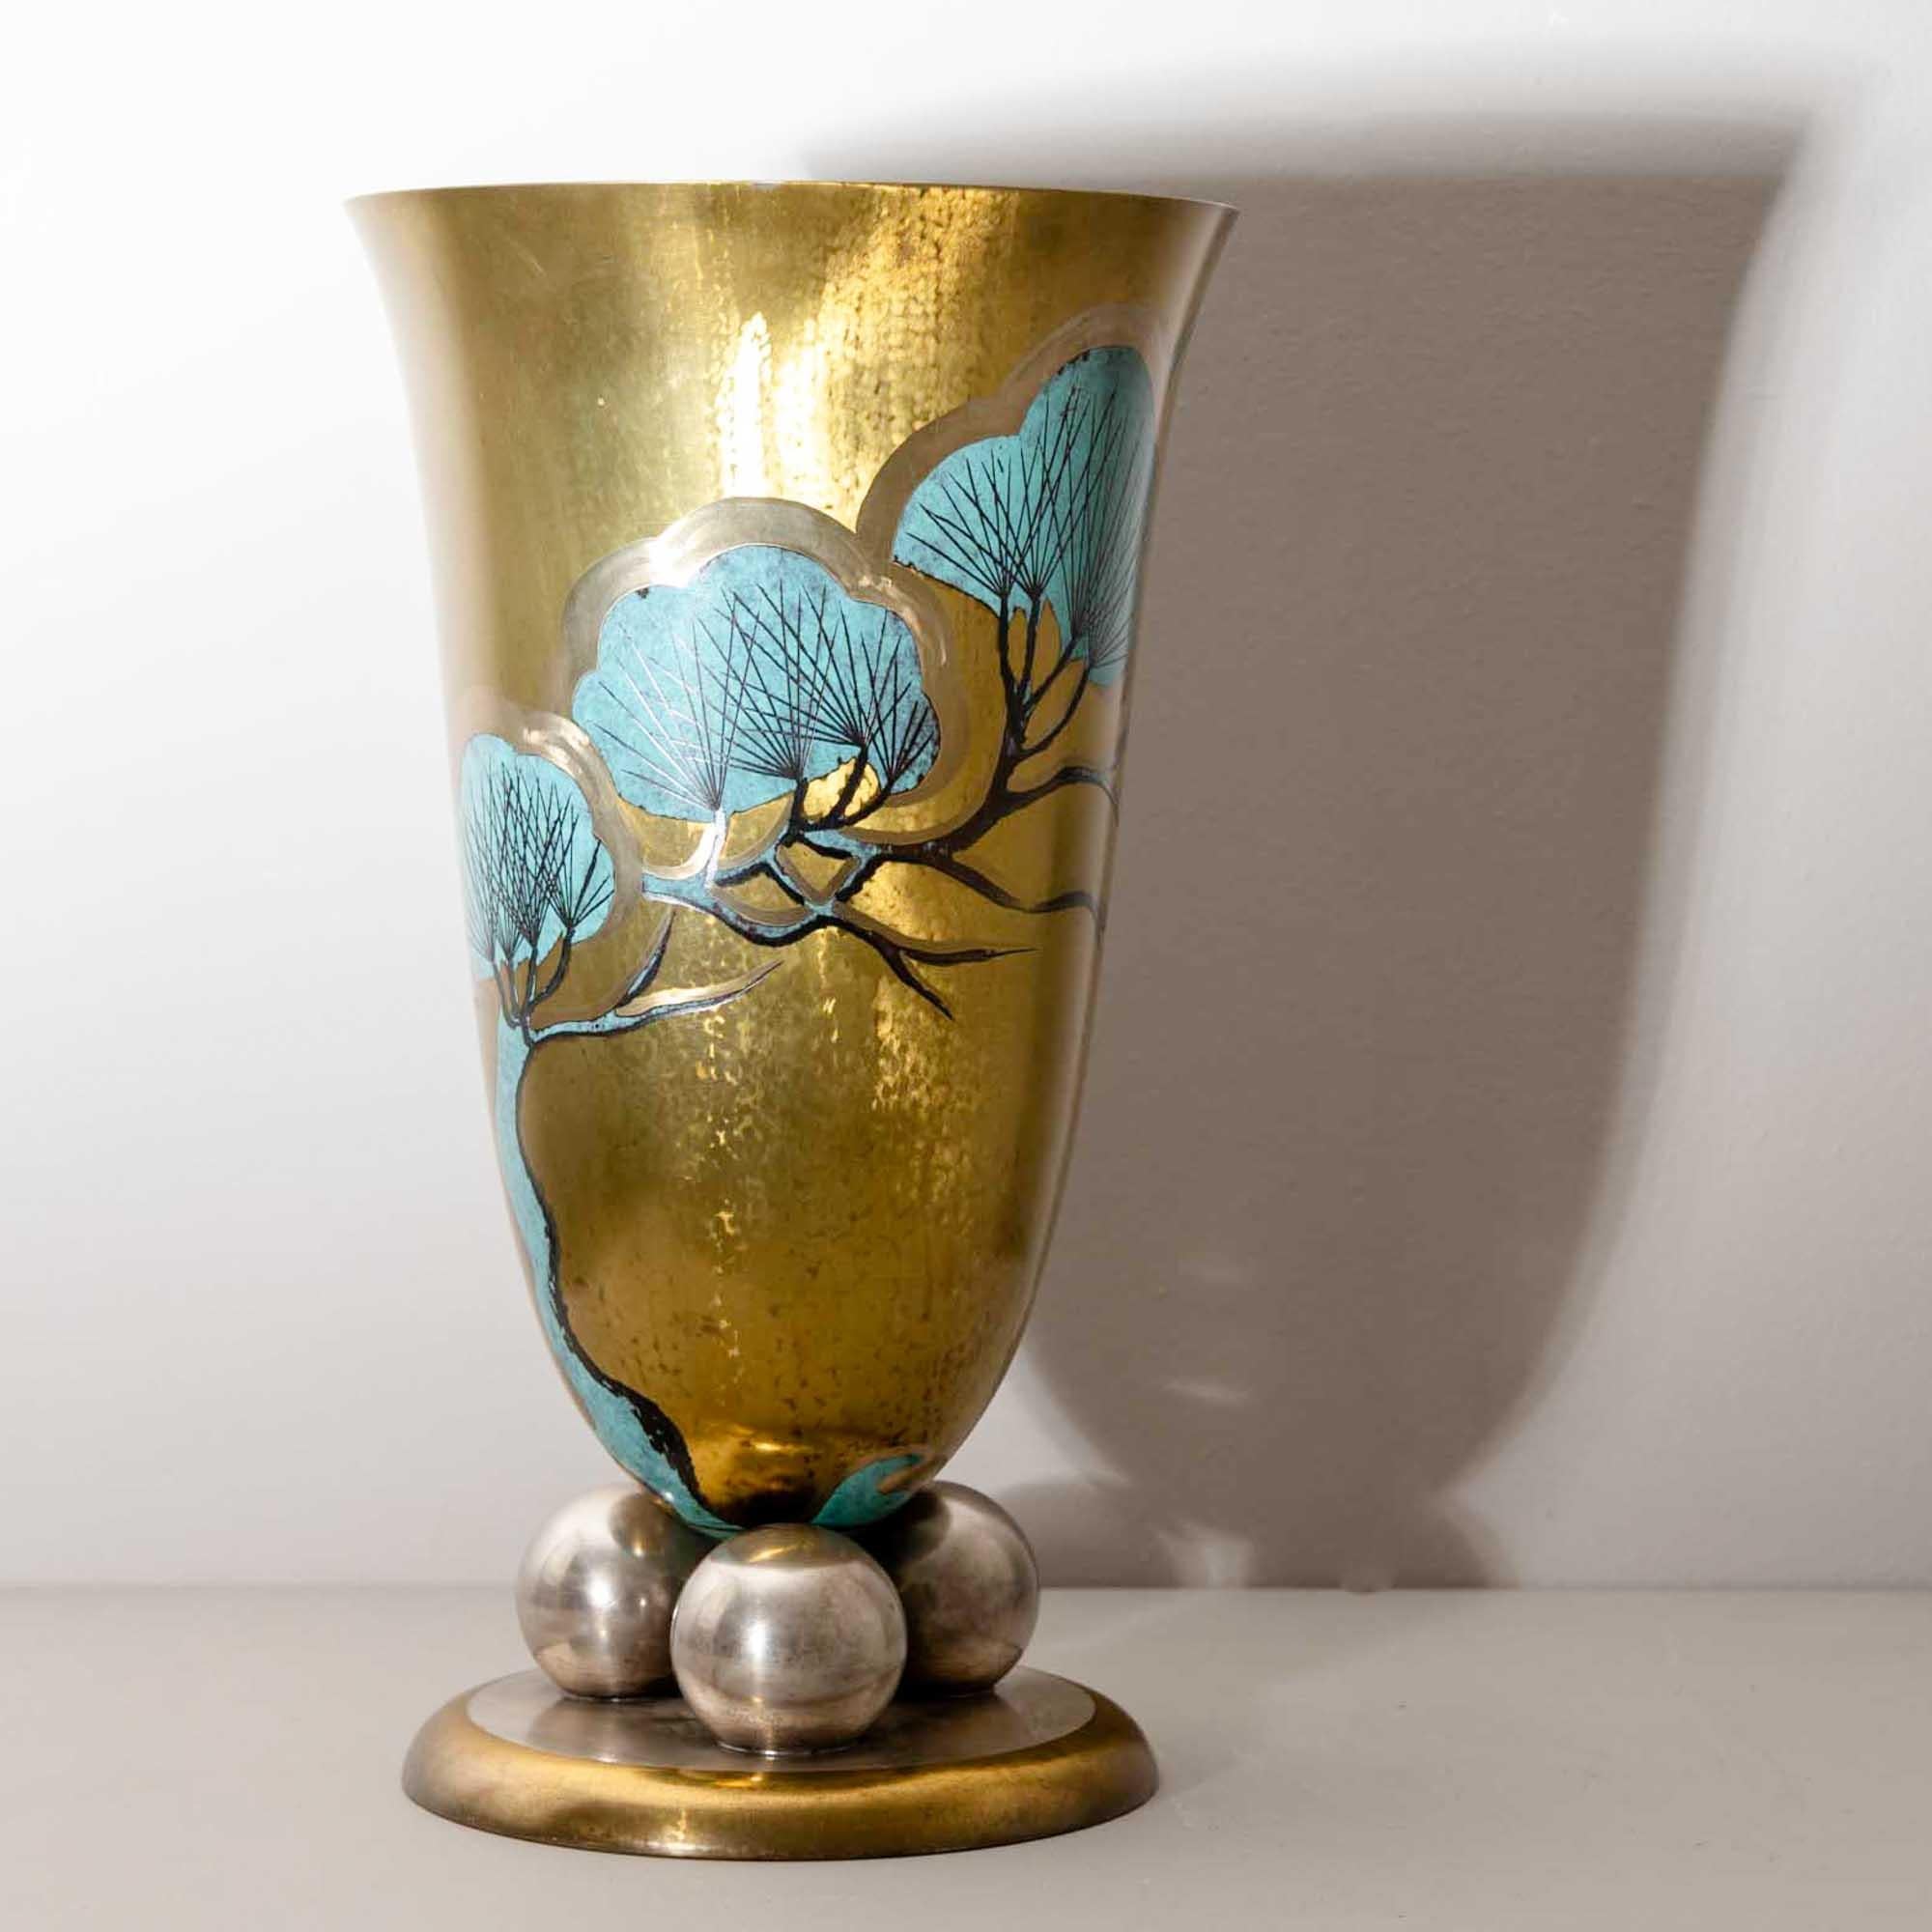 Metal Large WMF Vase with Pine Branch Décor, 1920s/30s